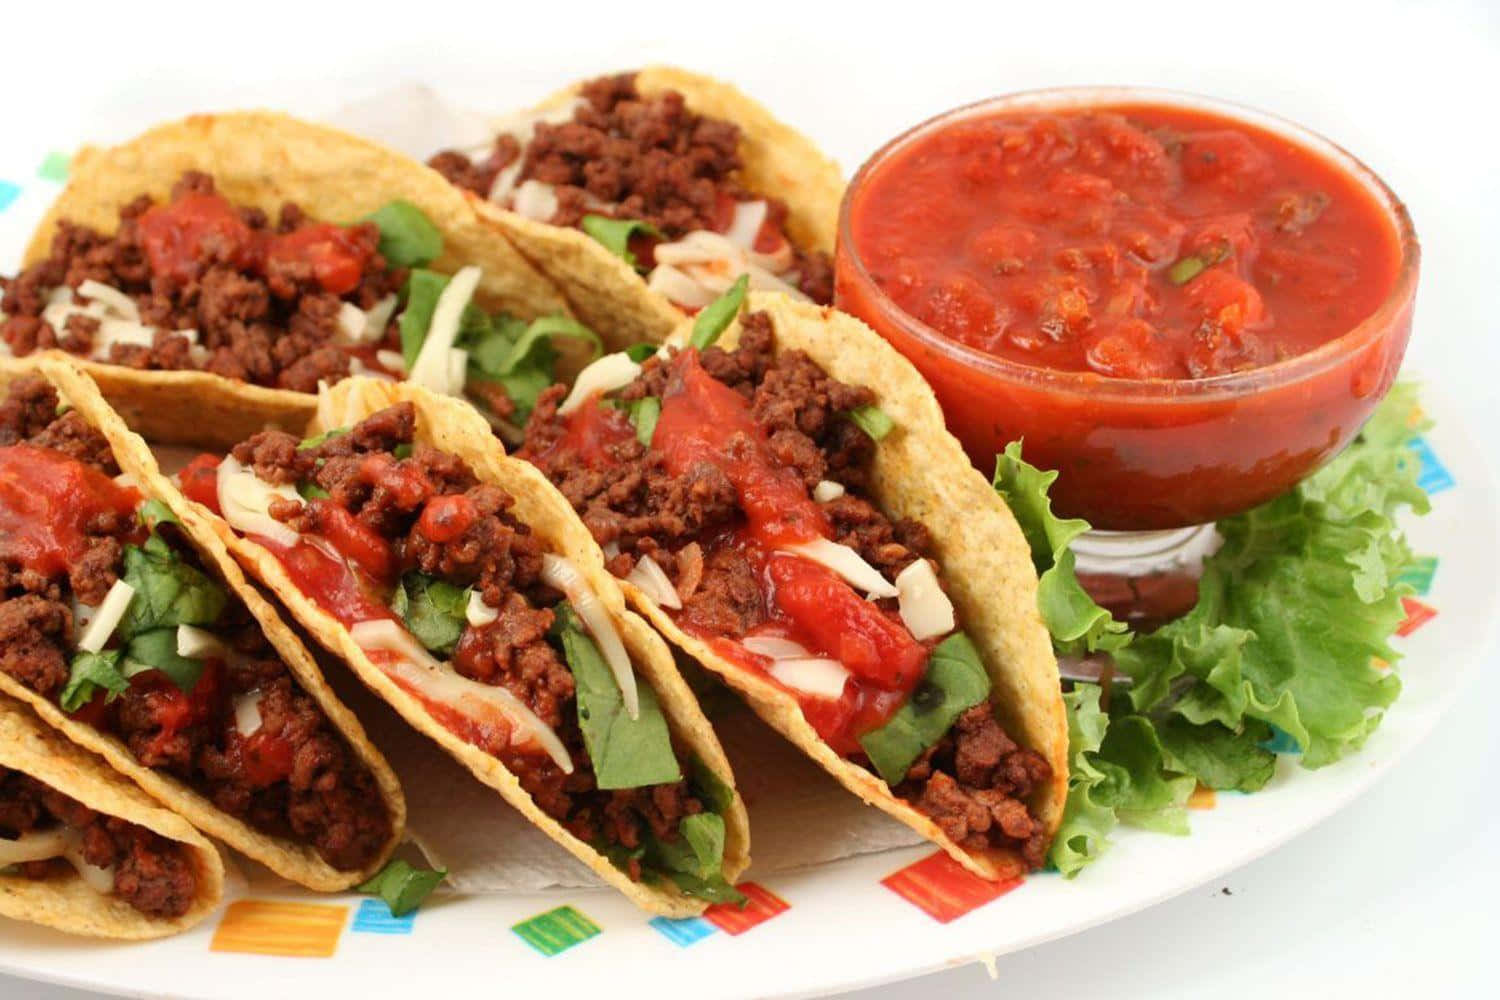 A Plate Of Tacos With Sauce And Salsa